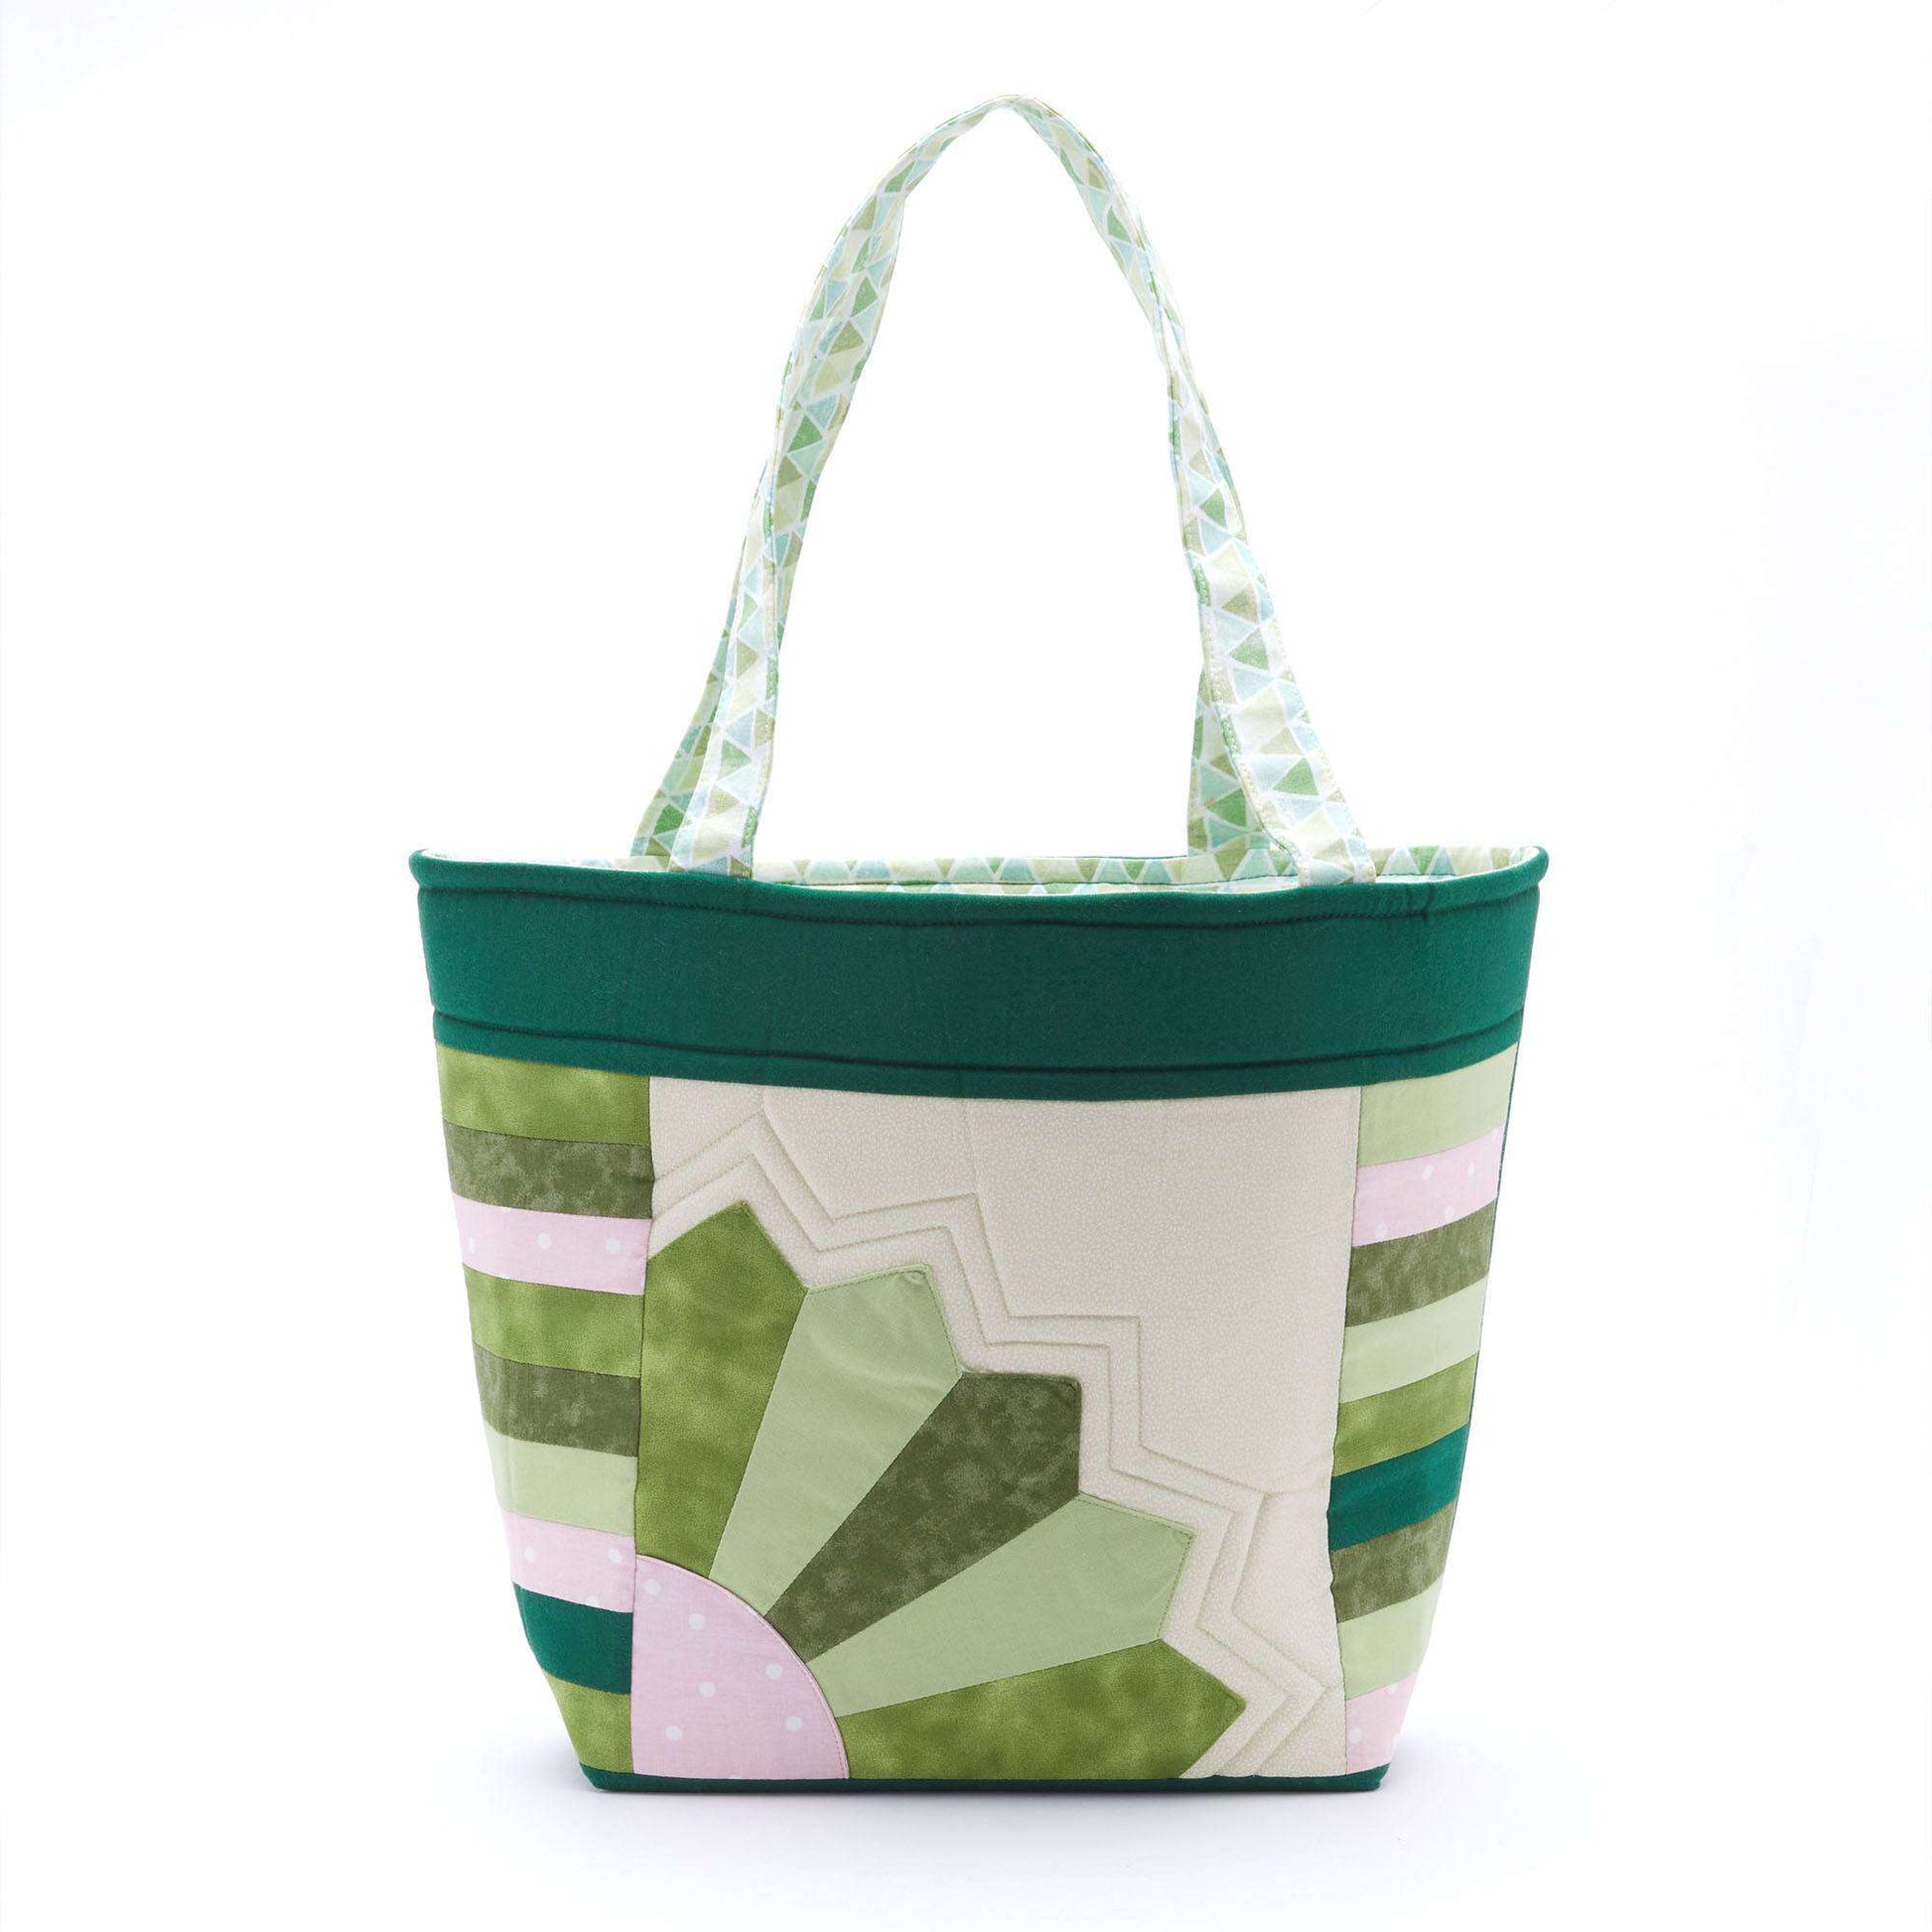 Free Coats Quilting & Clark Quilt Block Tote Pattern